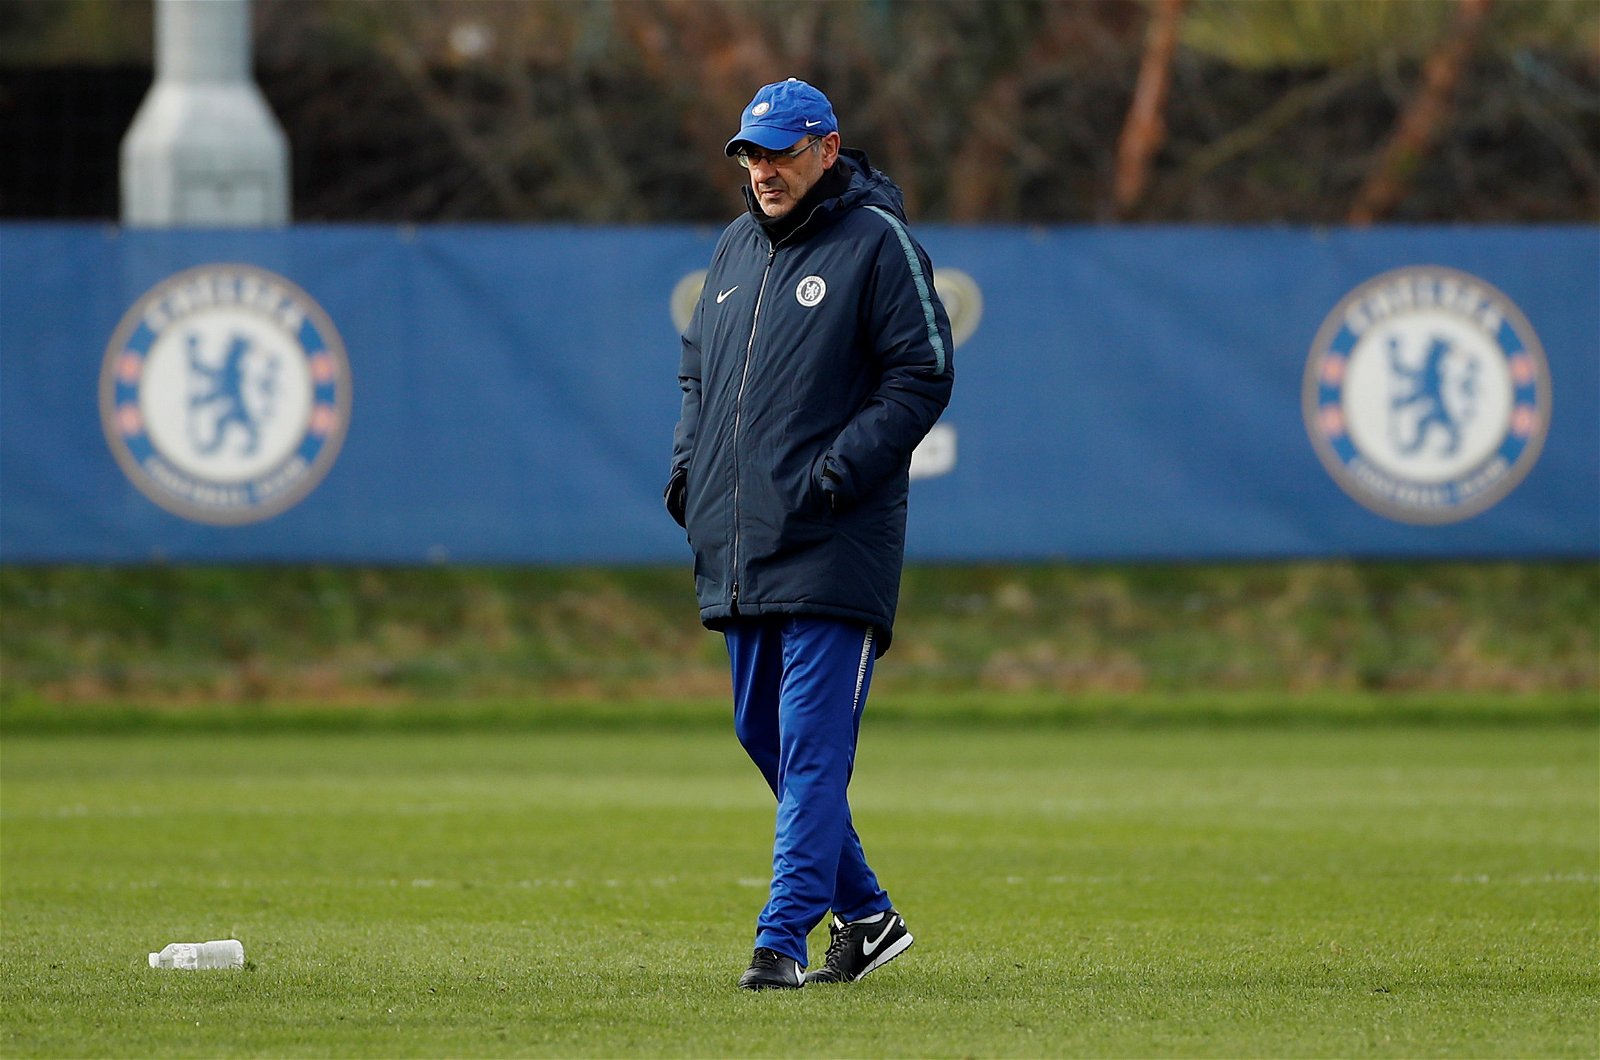 Maurizio Sarri odds to get sacked: will Sarri get fired by Chelsea?